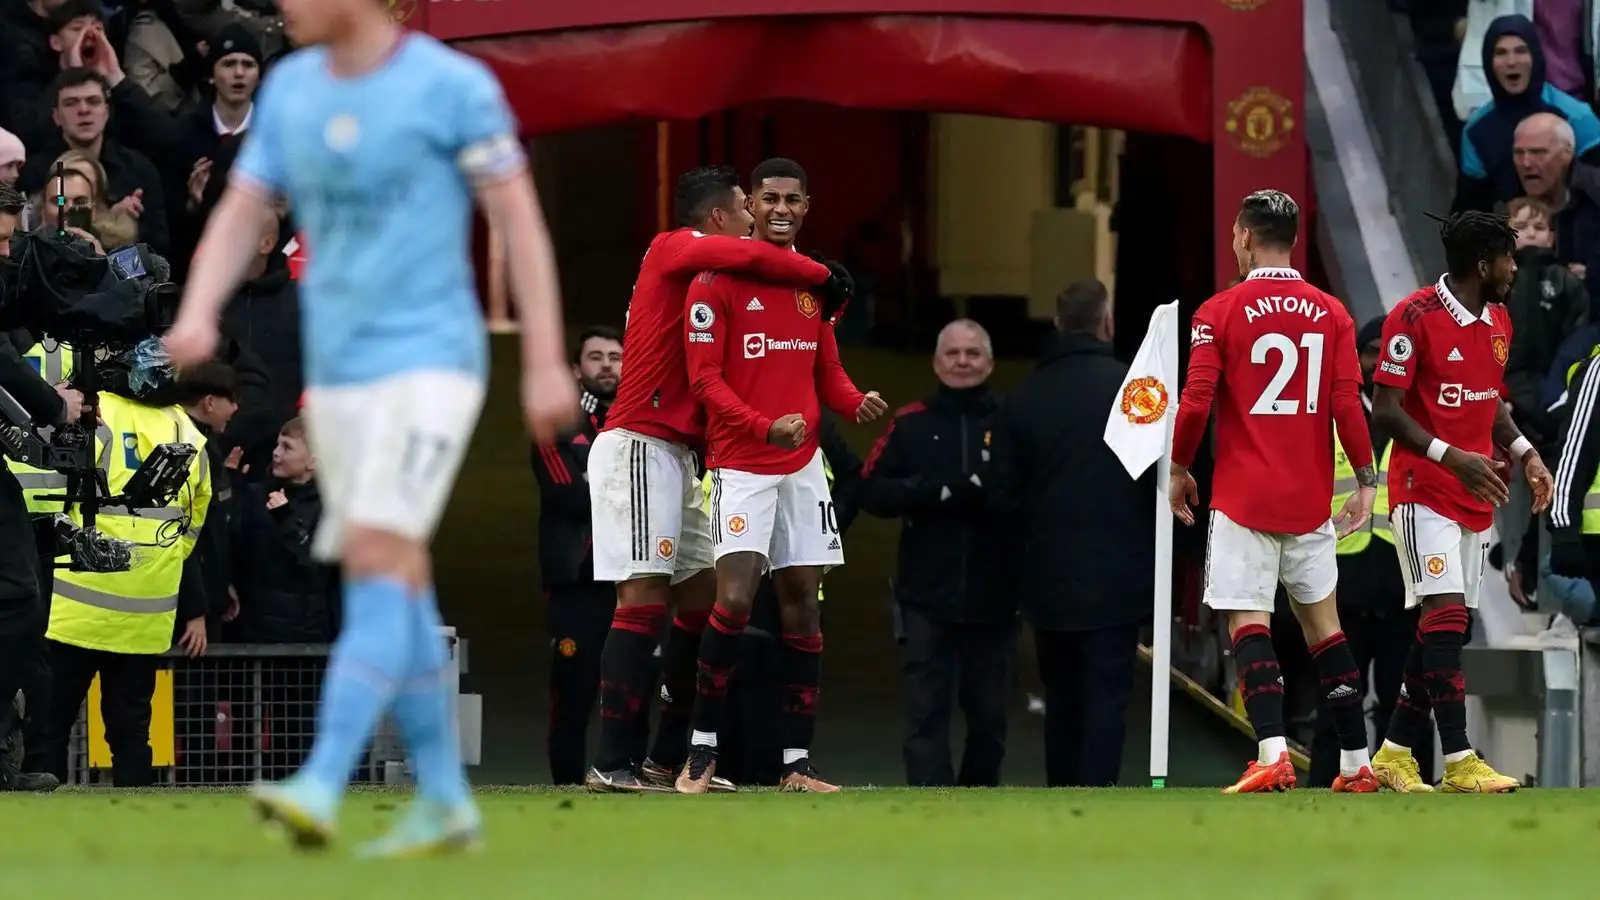 Manchester City vs Manchester United 2-1 – as it happened